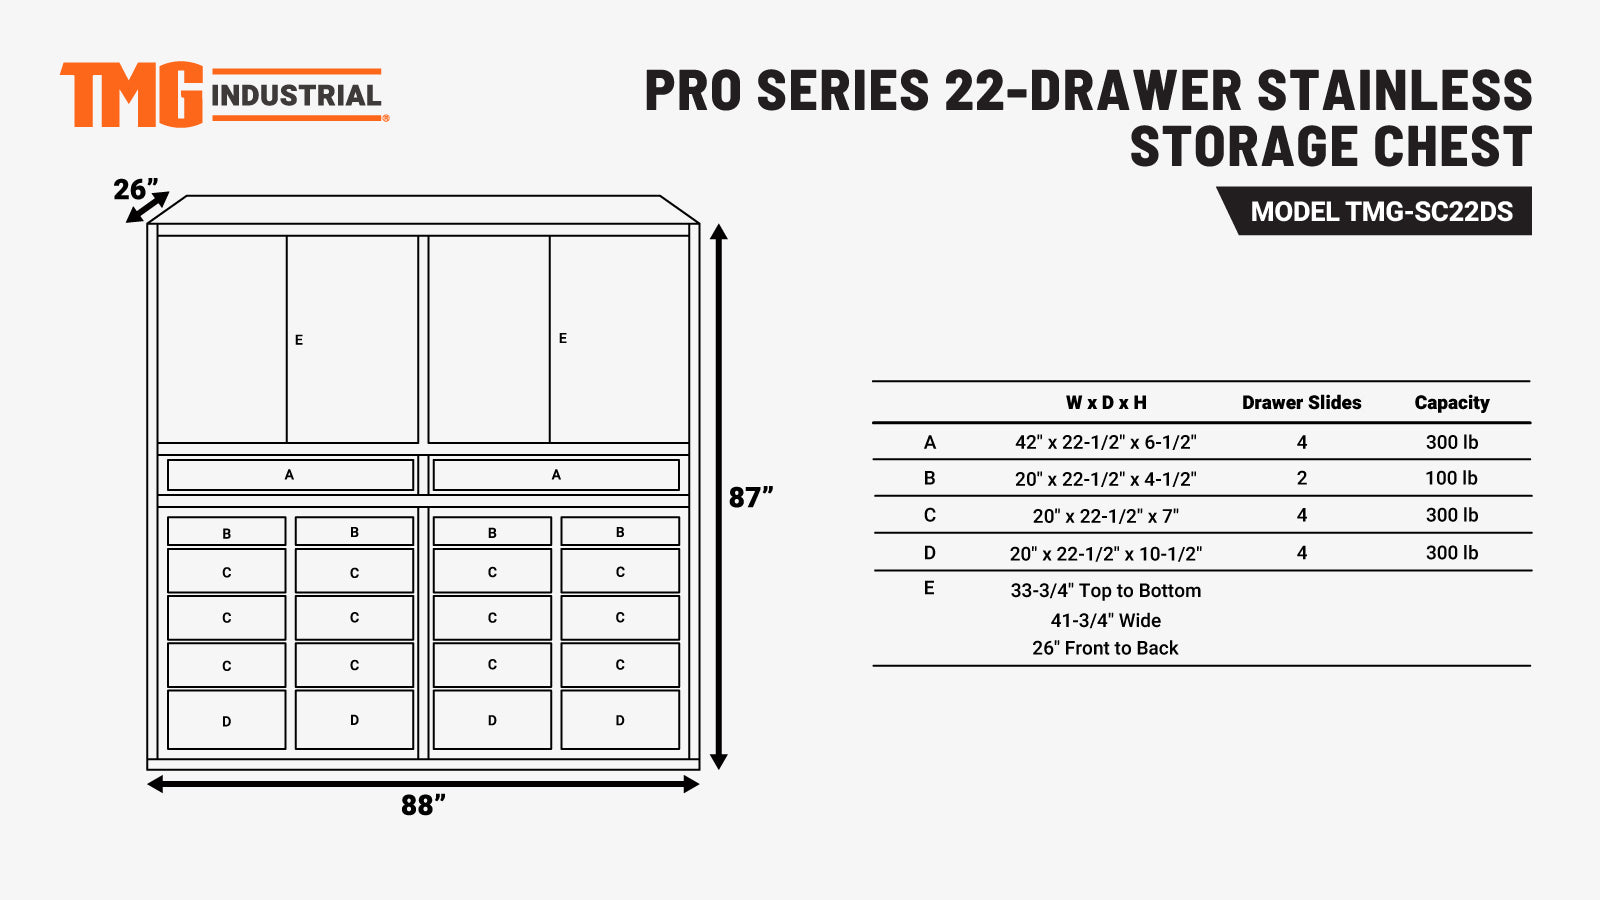 TMG Industrial Pro Series 7-Ft 22 Drawer Stainless Steel Storage Chest w/Brushed Aluminum Handles, Top Cabinets, All-in-One Welded Frame, Keyed Alike Locks, TMG-SC22DS-specifications-image